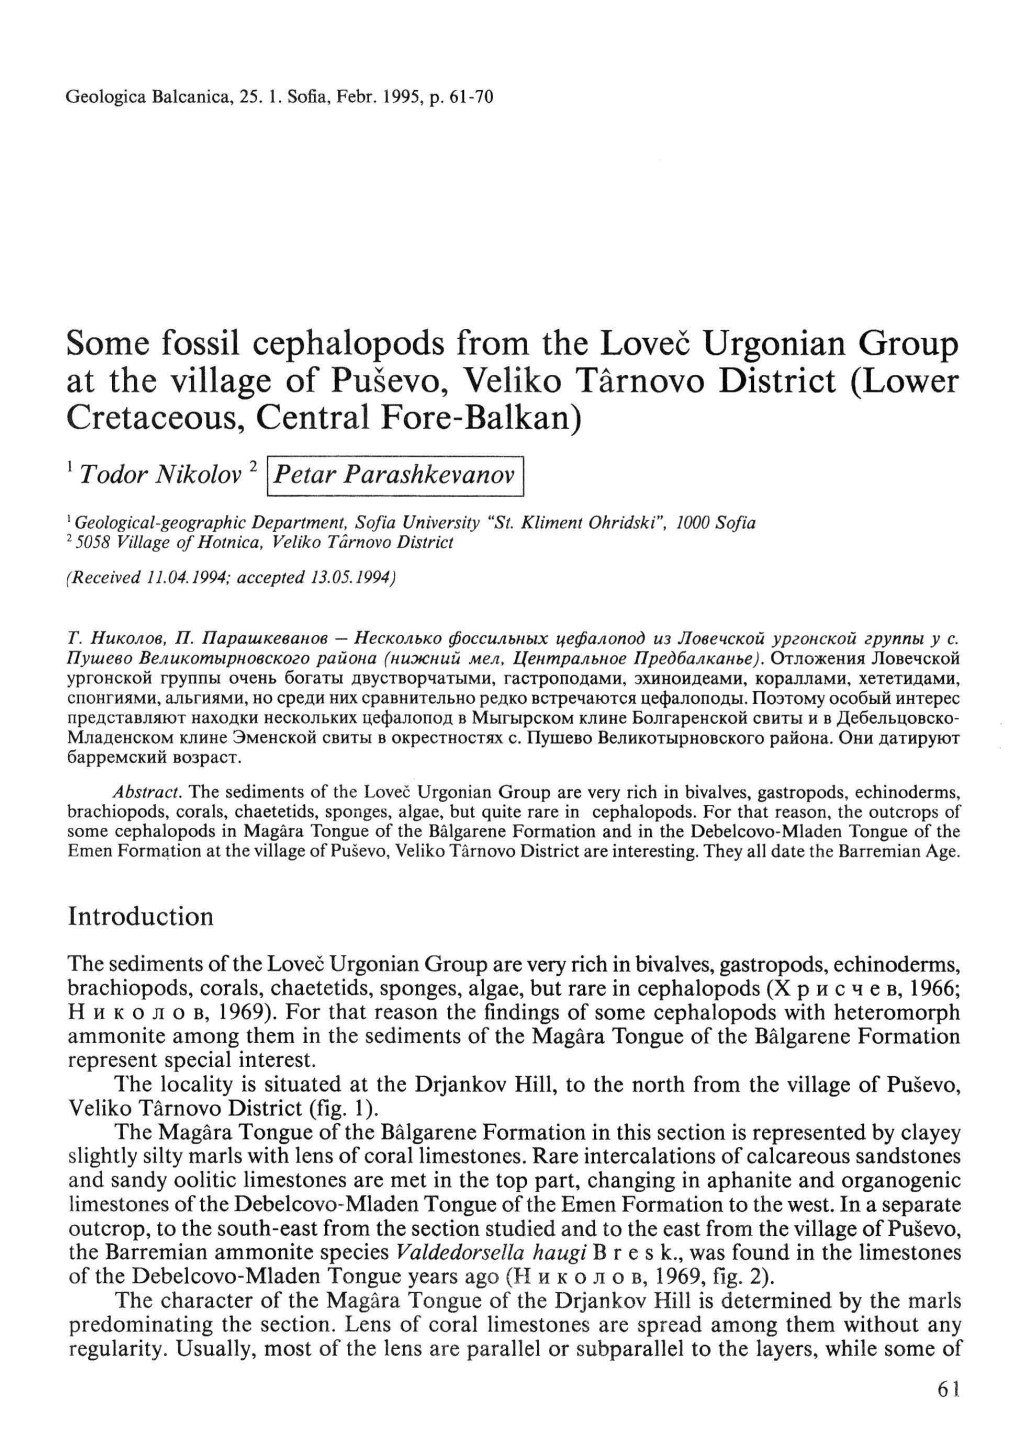 Some Fossil Cephalopods from the Lovec Urgonian Group at the Village of Pusevo, Veliko Tarnovo District (Lower Cretaceous, Central Fore-Balkan)